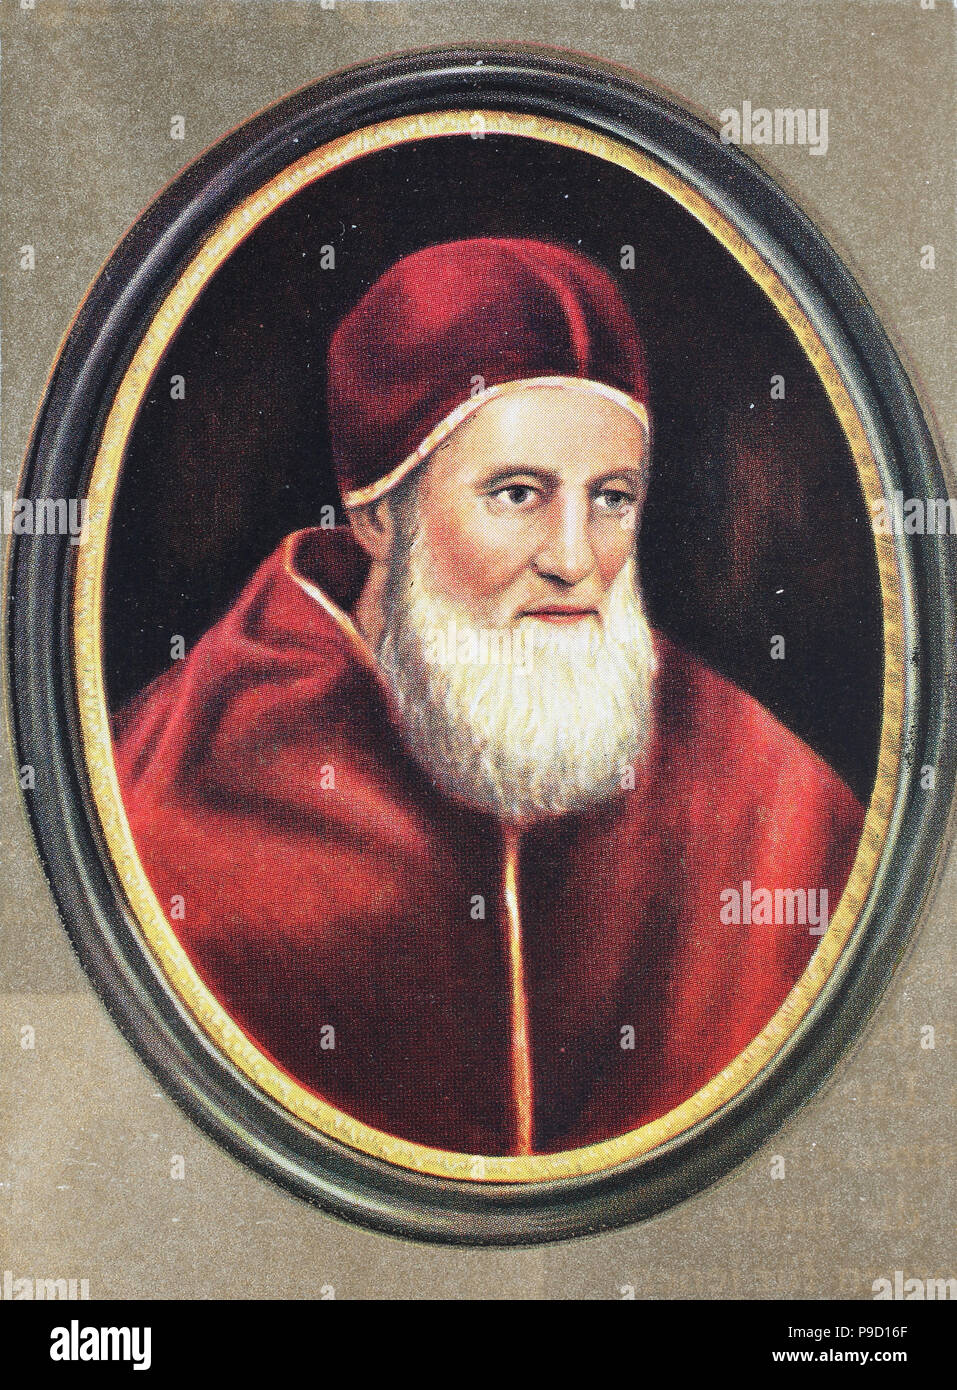 Pope Julius II,Papa Giulio II (5 December 1443 â€“ 21 February 1513), born Giuliano della Rovere, and nicknamed The Fearsome Pope and The Warrior Pope, digital improved reproduction of an original print from the year 1900 Stock Photo